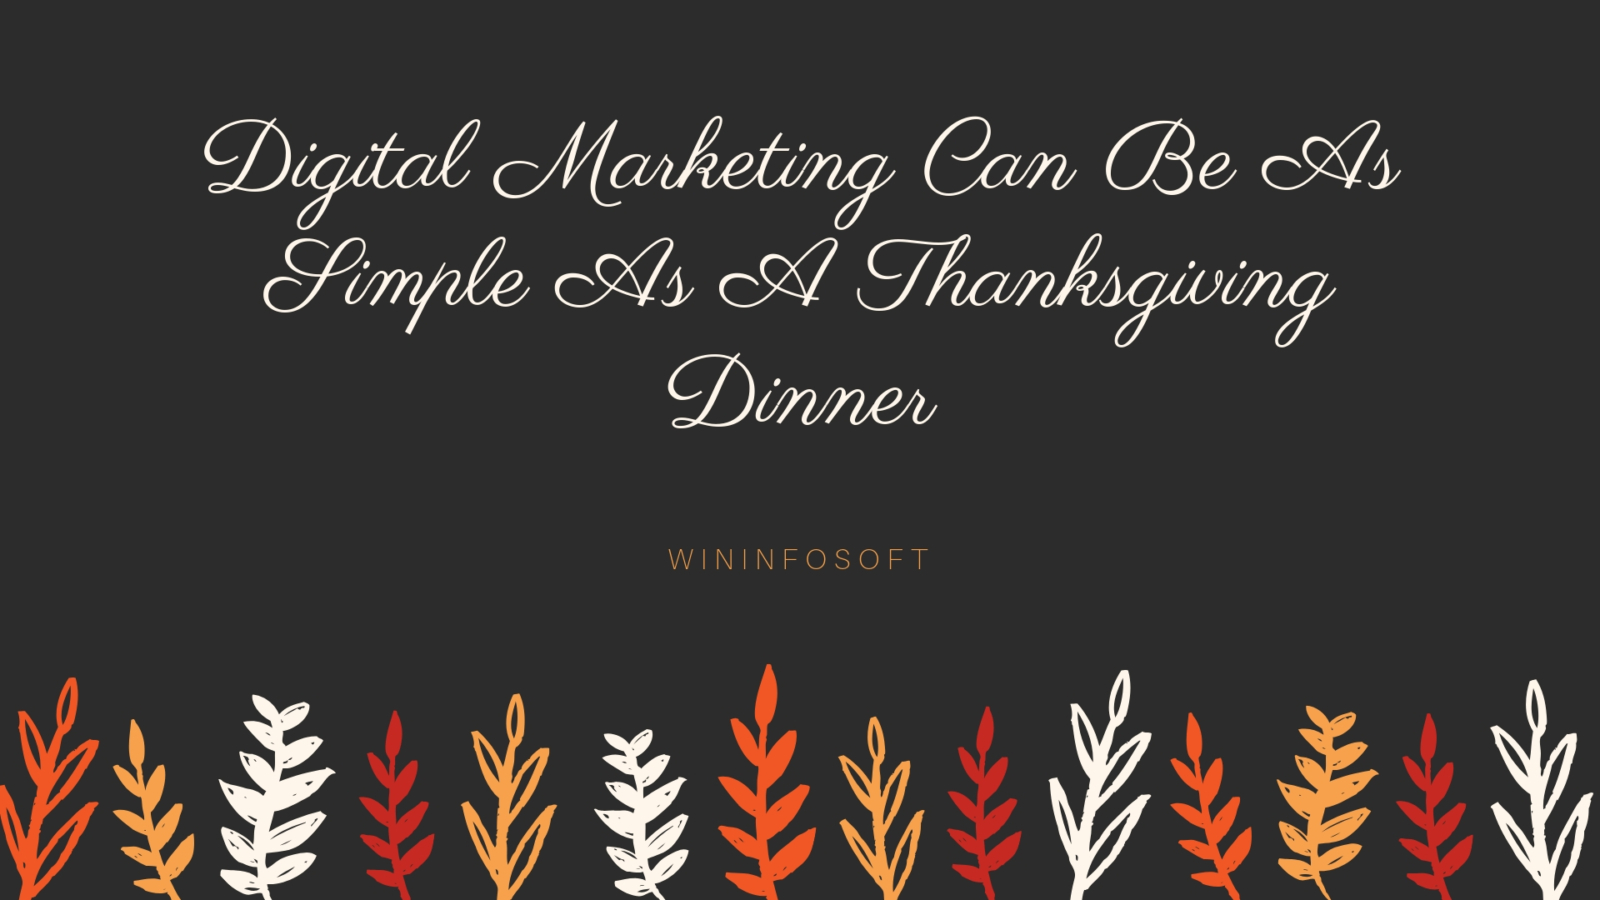 Digital Marketing Can Be As Simple As A Thanksgiving Dinner